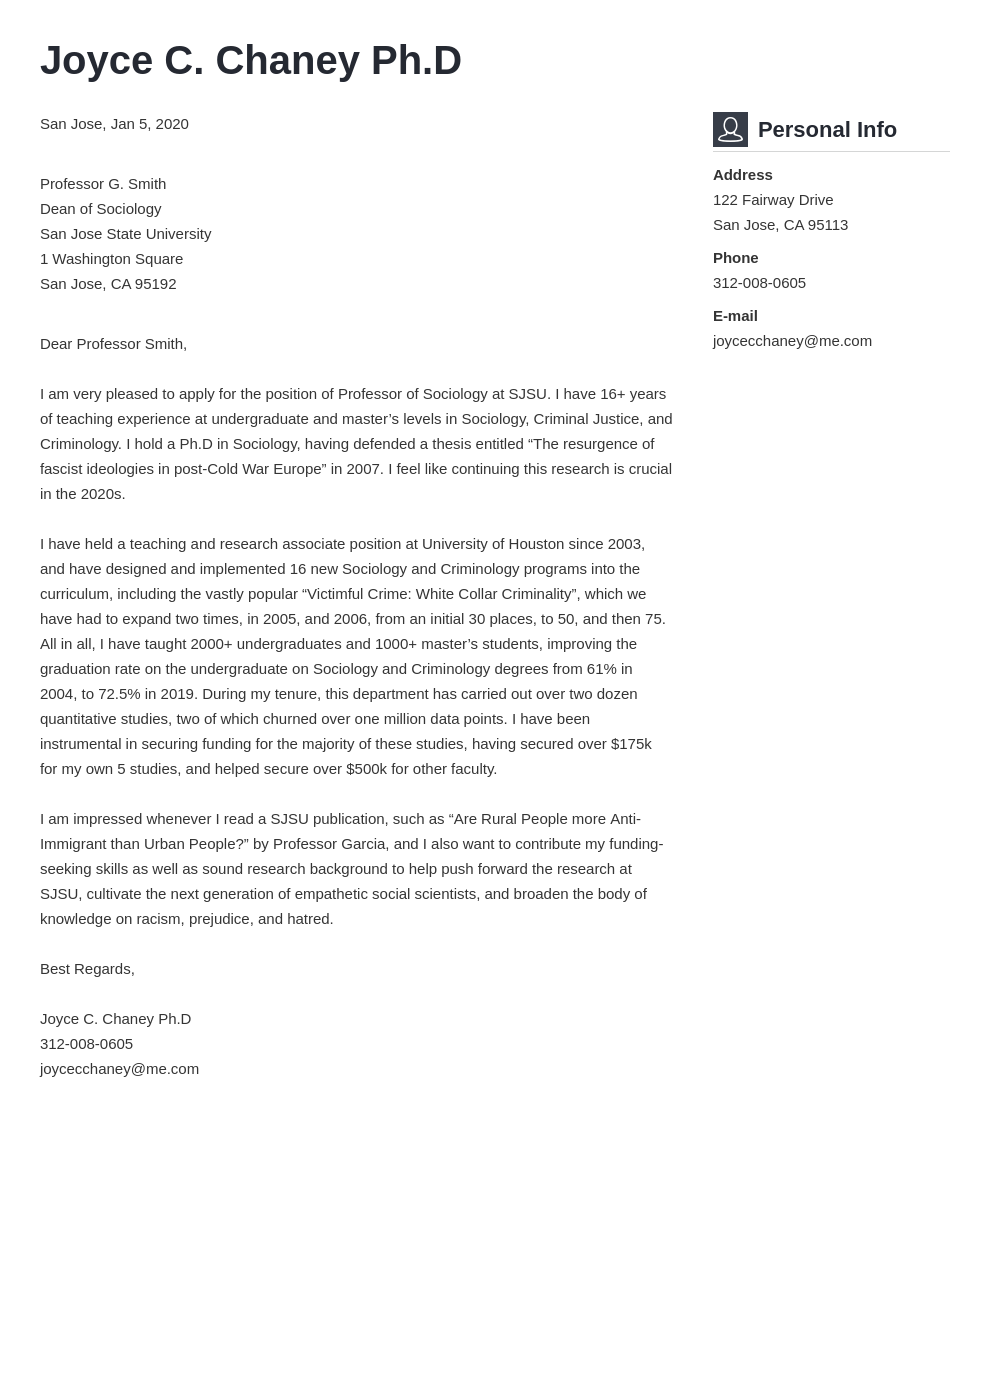 Academic Cover Letter: Samples & Ready-to-Fill Templates